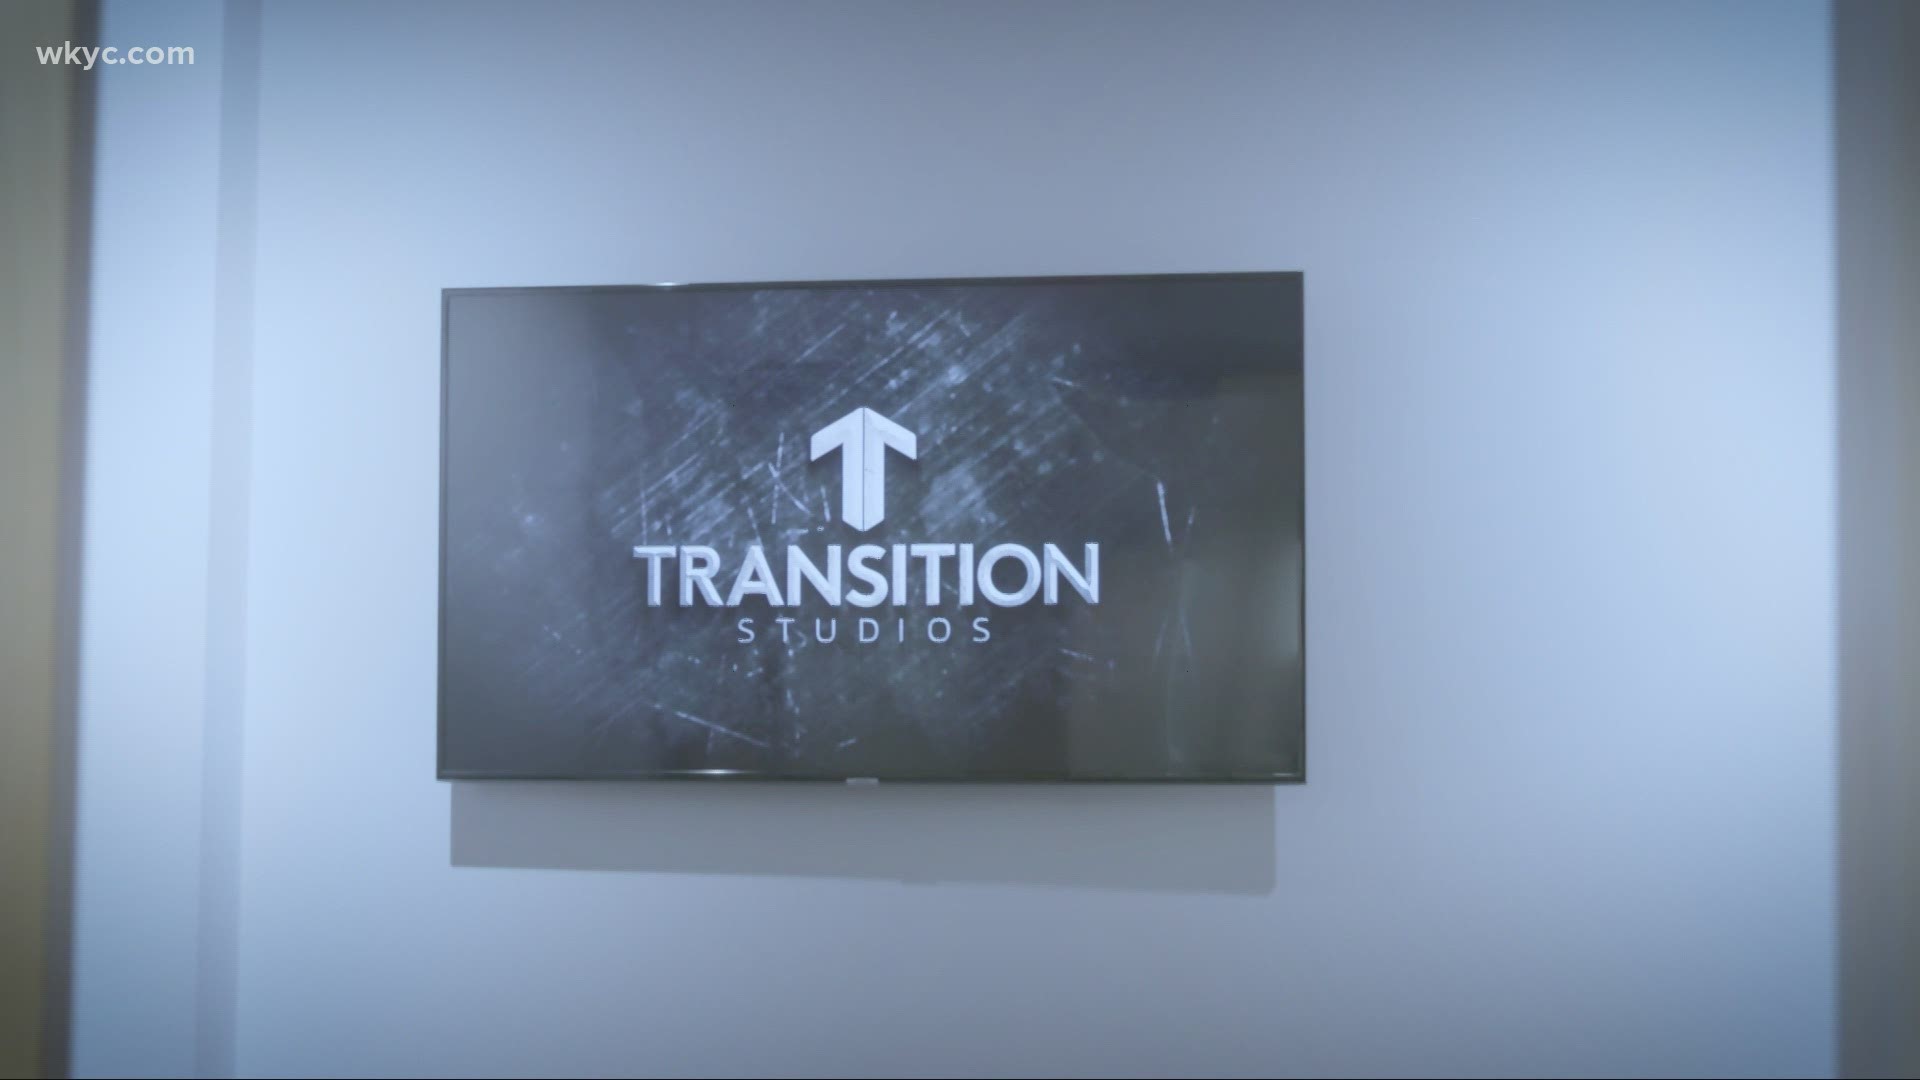 Transition is a film studio full of Netflix top 10 documentaries, awards and national press. Chris Webb has more on this local success story.